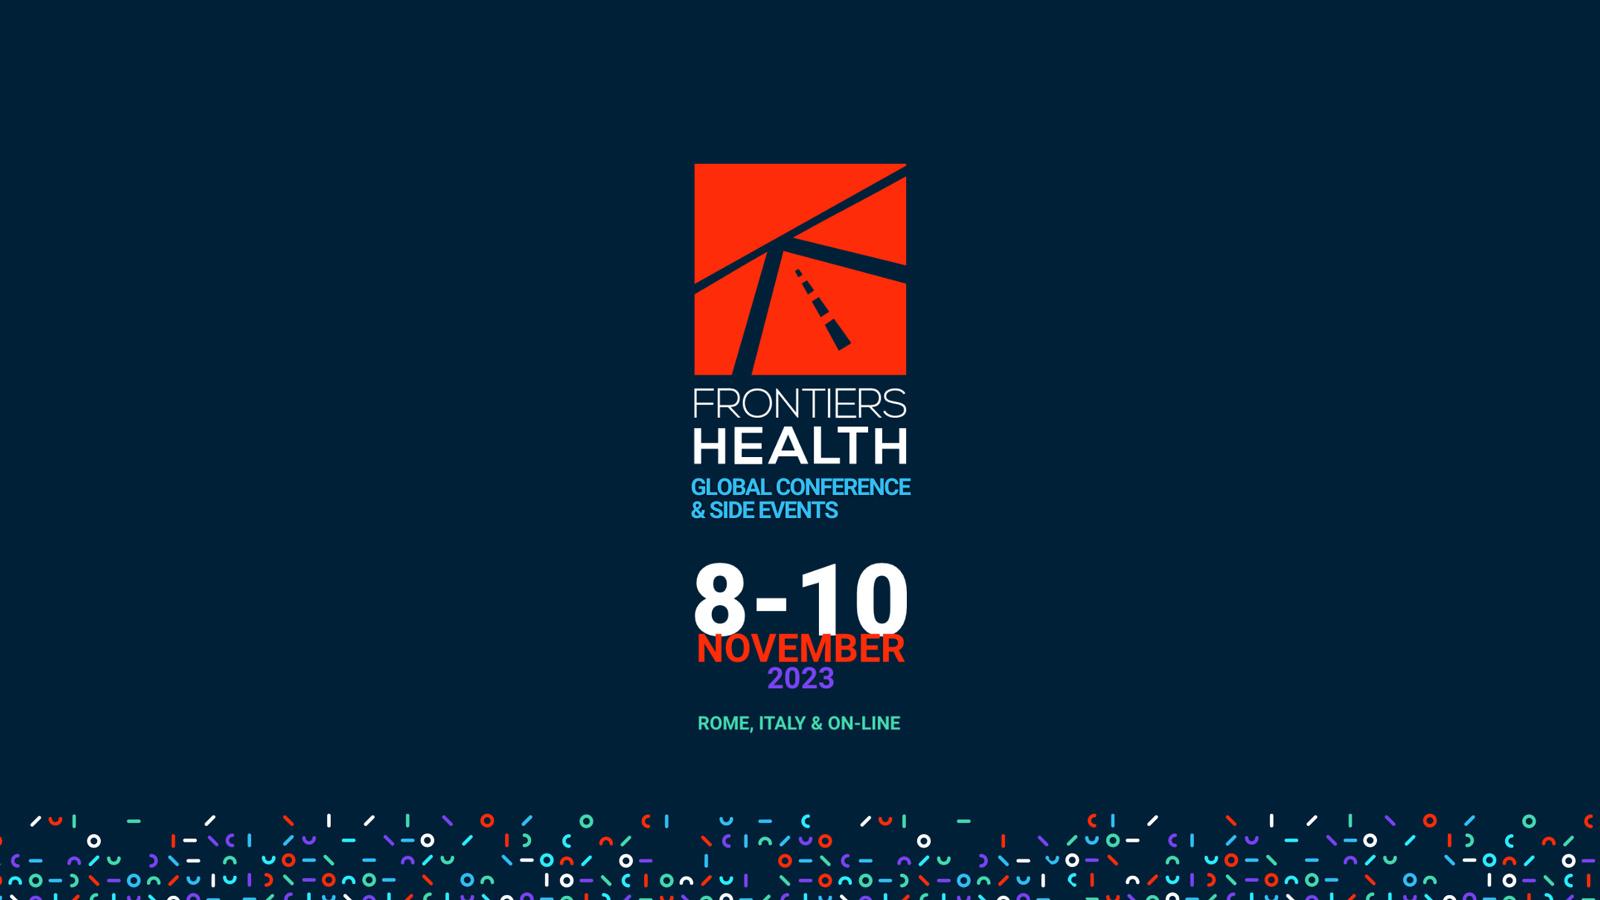 Frontiers Health 2023 Rome